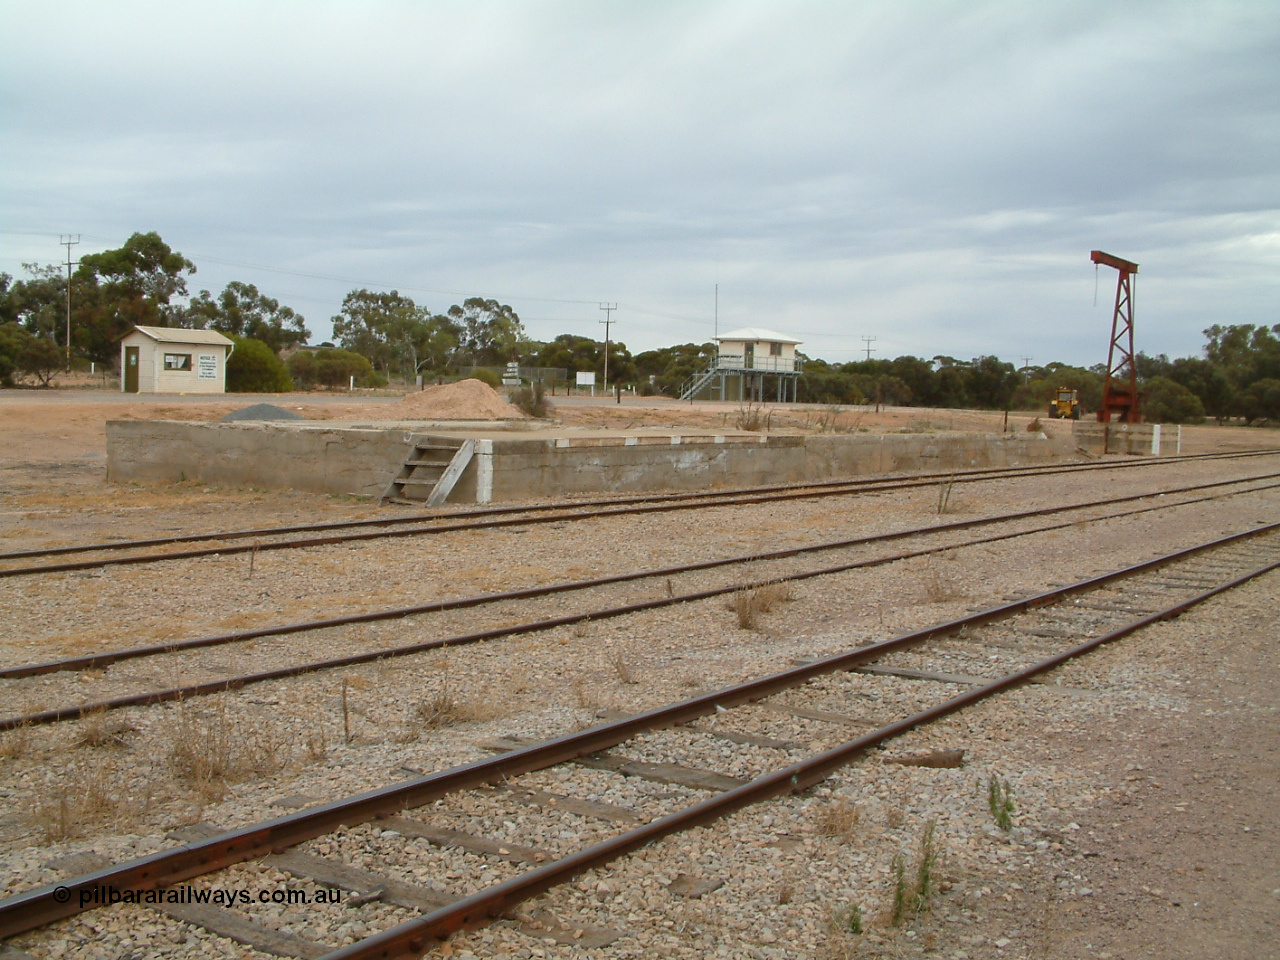 030407 094425
Minnipa, yard view of loading ramp and former site of goods shed, rotating jib crane and road vehicle weighbridge scale room and grain truck sampling building in the background. 7th April, 2003.
